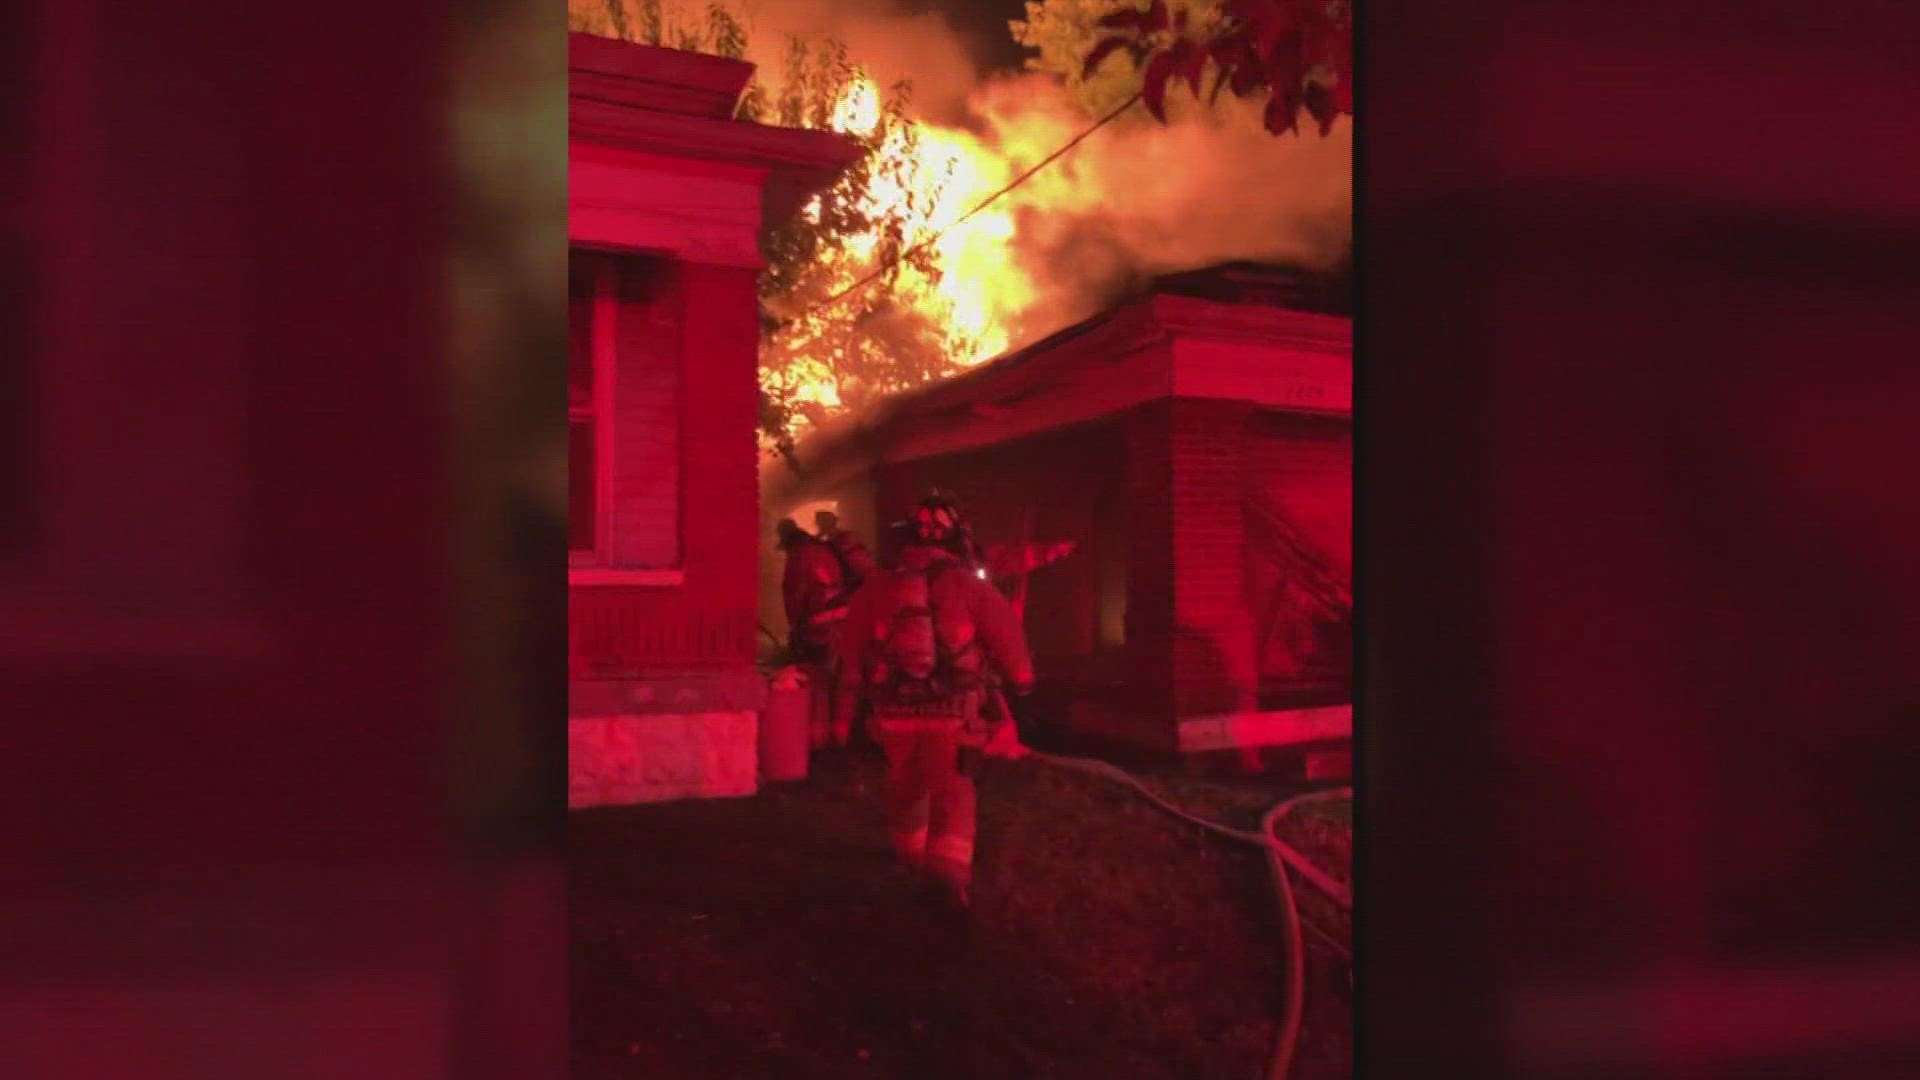 Louisville Fire said the fire was reported on Magazine Street around 10 p.m. Thursday. The department said nobody was inside the house and no injuries were reported.